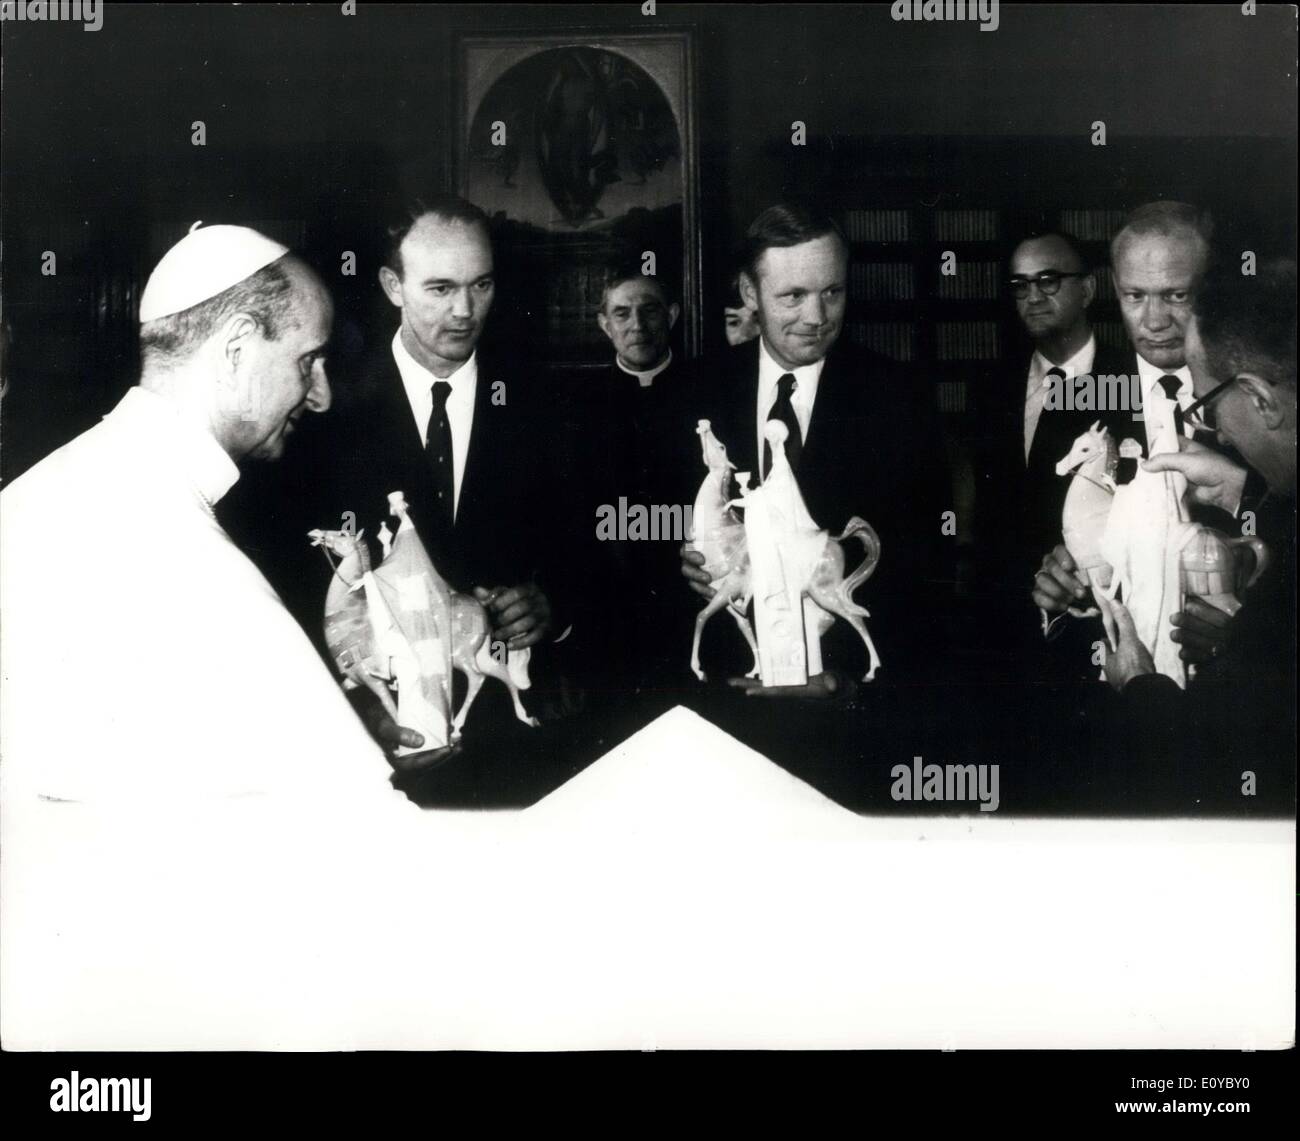 Oct. 18, 1969 - The Pope Meets the American Lunarauts: During their visit to Rome, the three American lunarauts, Neil Armstrong, Col. Edwin Aldrin and Col. Michael Collins met the Pope during a private audience at the Vatican. Photo shows Pope Paul presents the three American lunnarauts (L. to R.) Michael Collins, Neil Armstrong and Edwin Aldrine, with statues of the Three Wise Men. Stock Photo